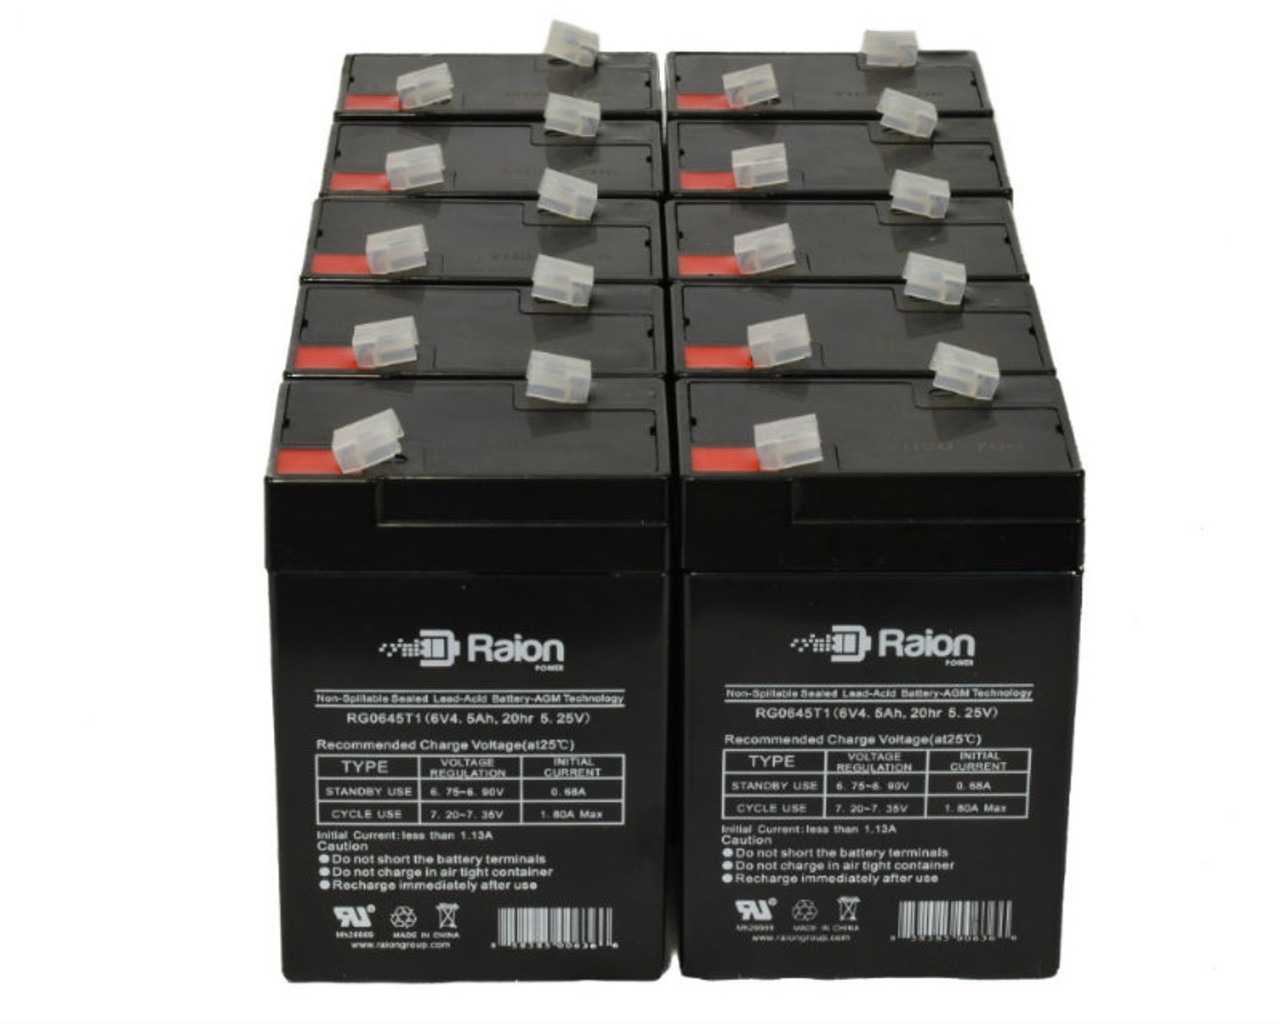 Raion Power 6V 4.5Ah Replacement Emergency Light Battery for National Power Corporation GS012P2 - 10 Pack